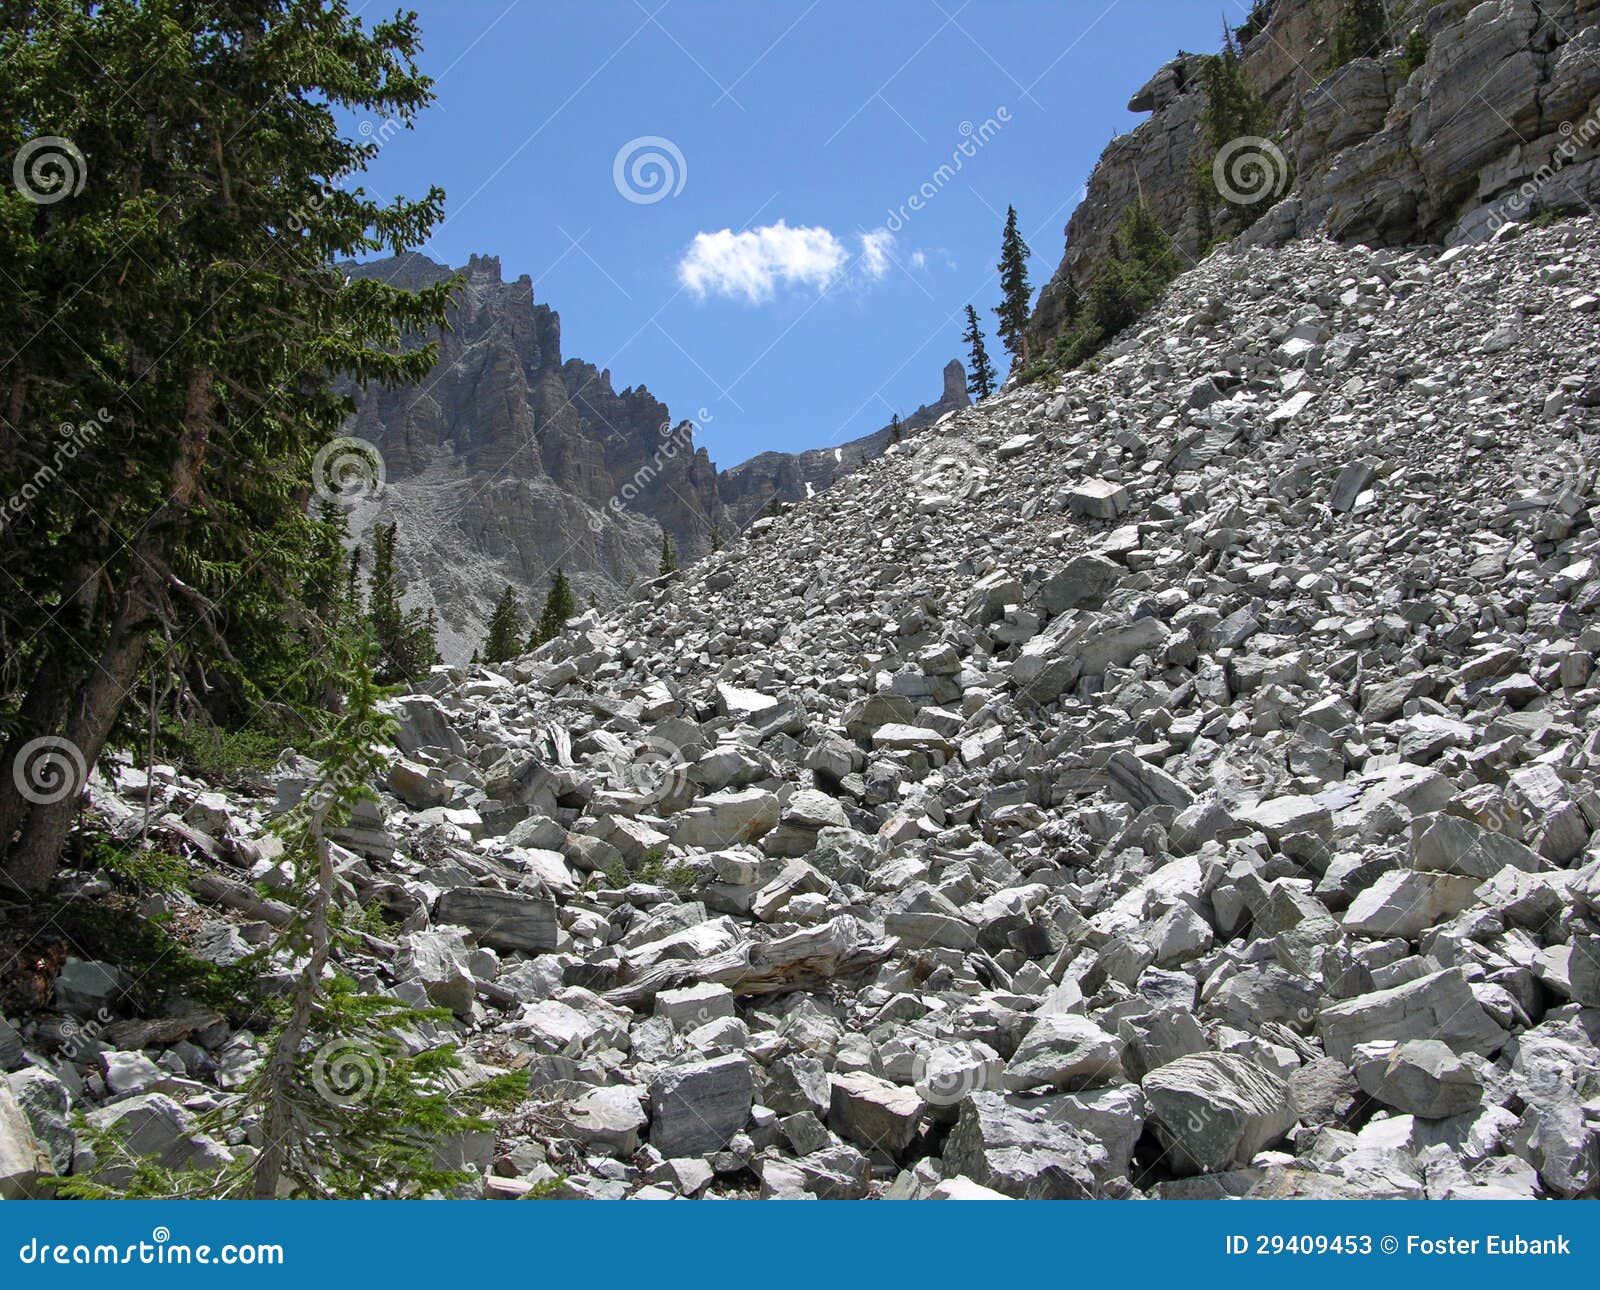 eroded limestone in the great basin national park